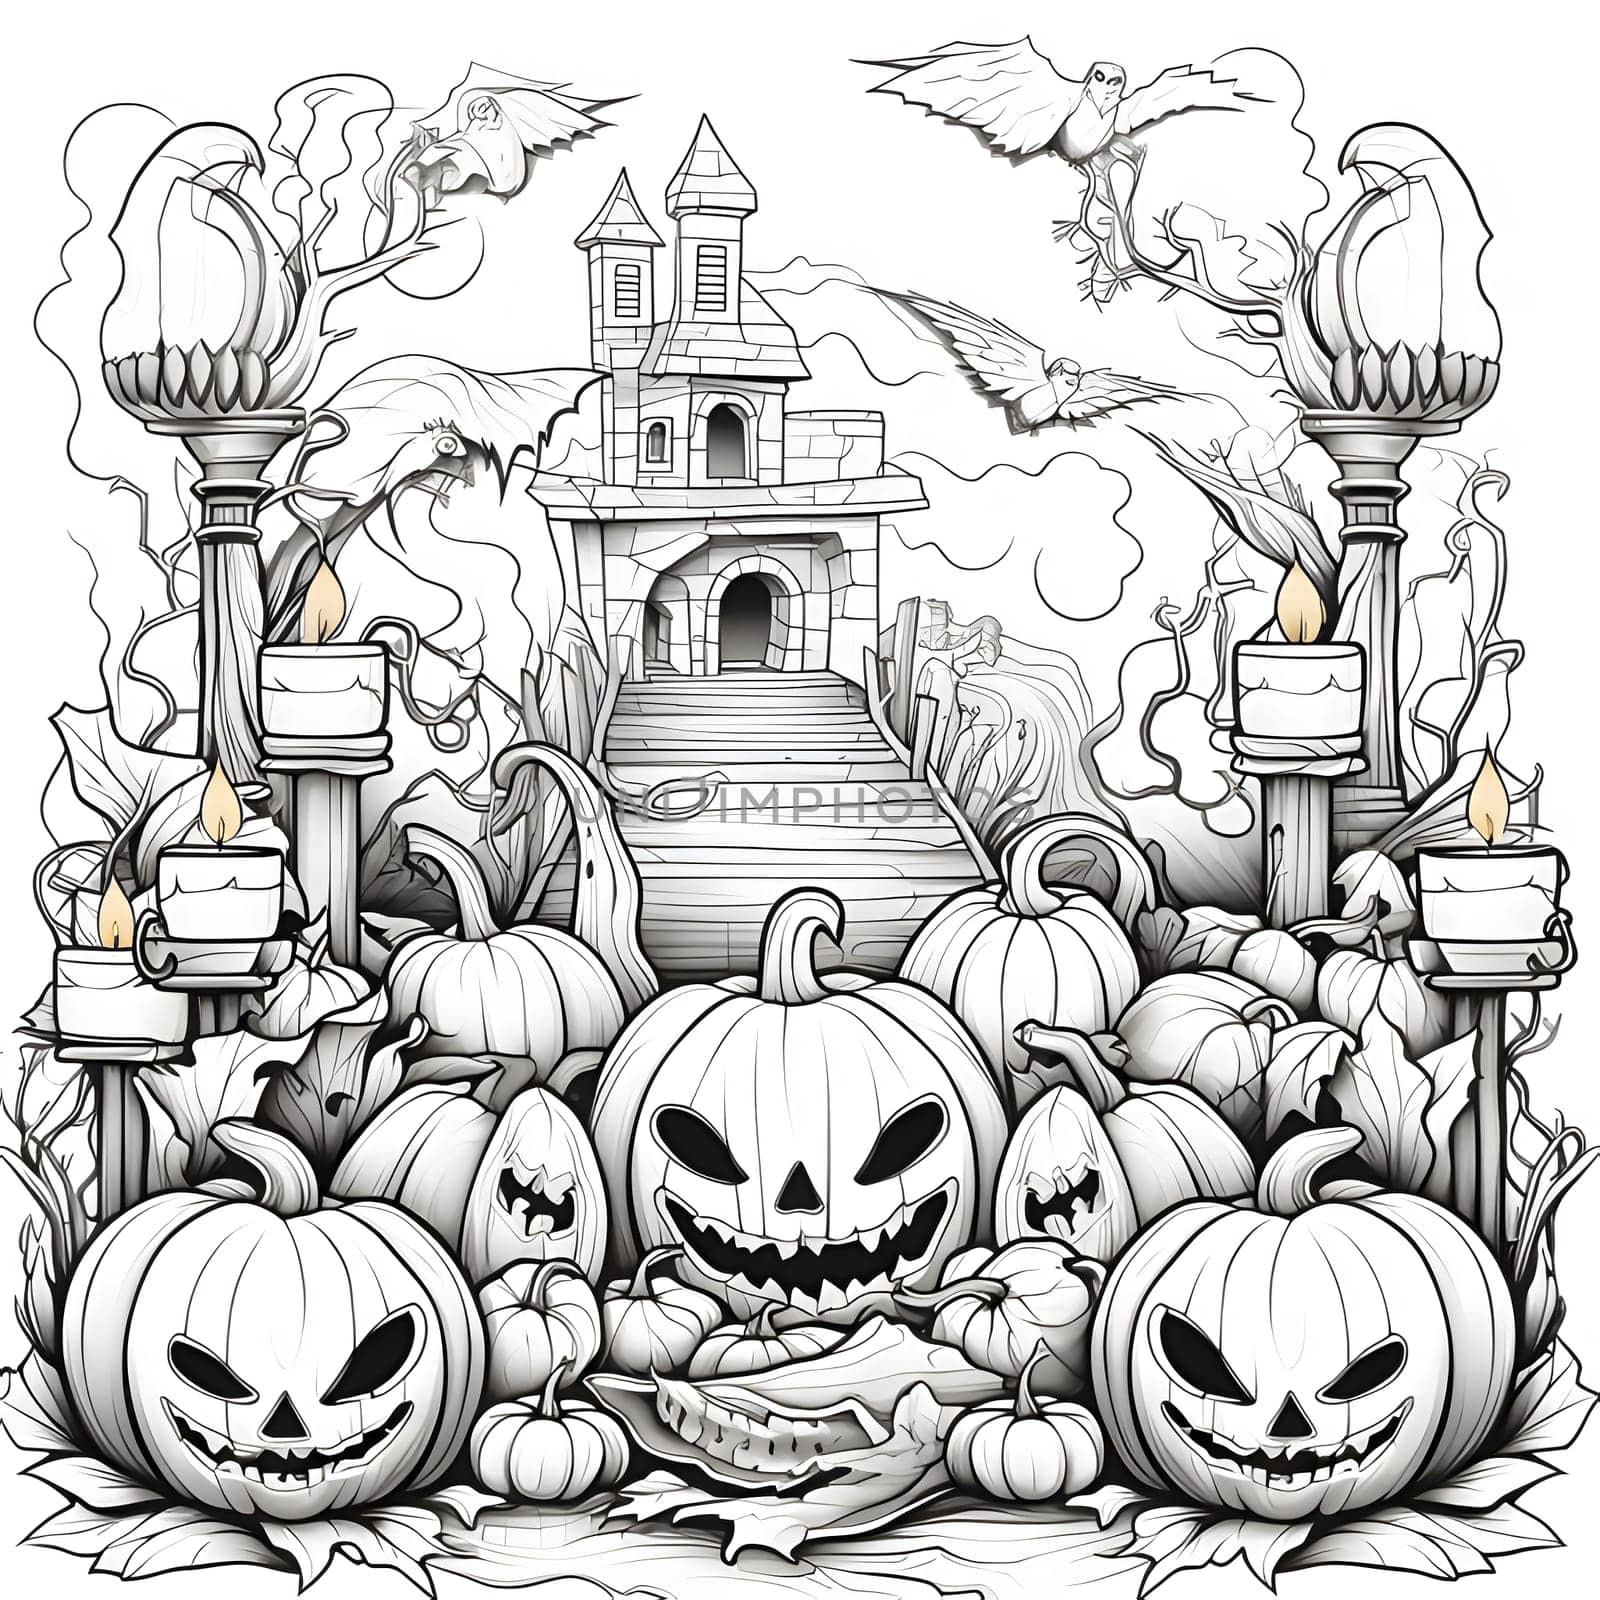 Road to the castle, flying birds and ominous jack-o-lantern pumpkins and lit candles, Halloween black and white picture coloring book. by ThemesS